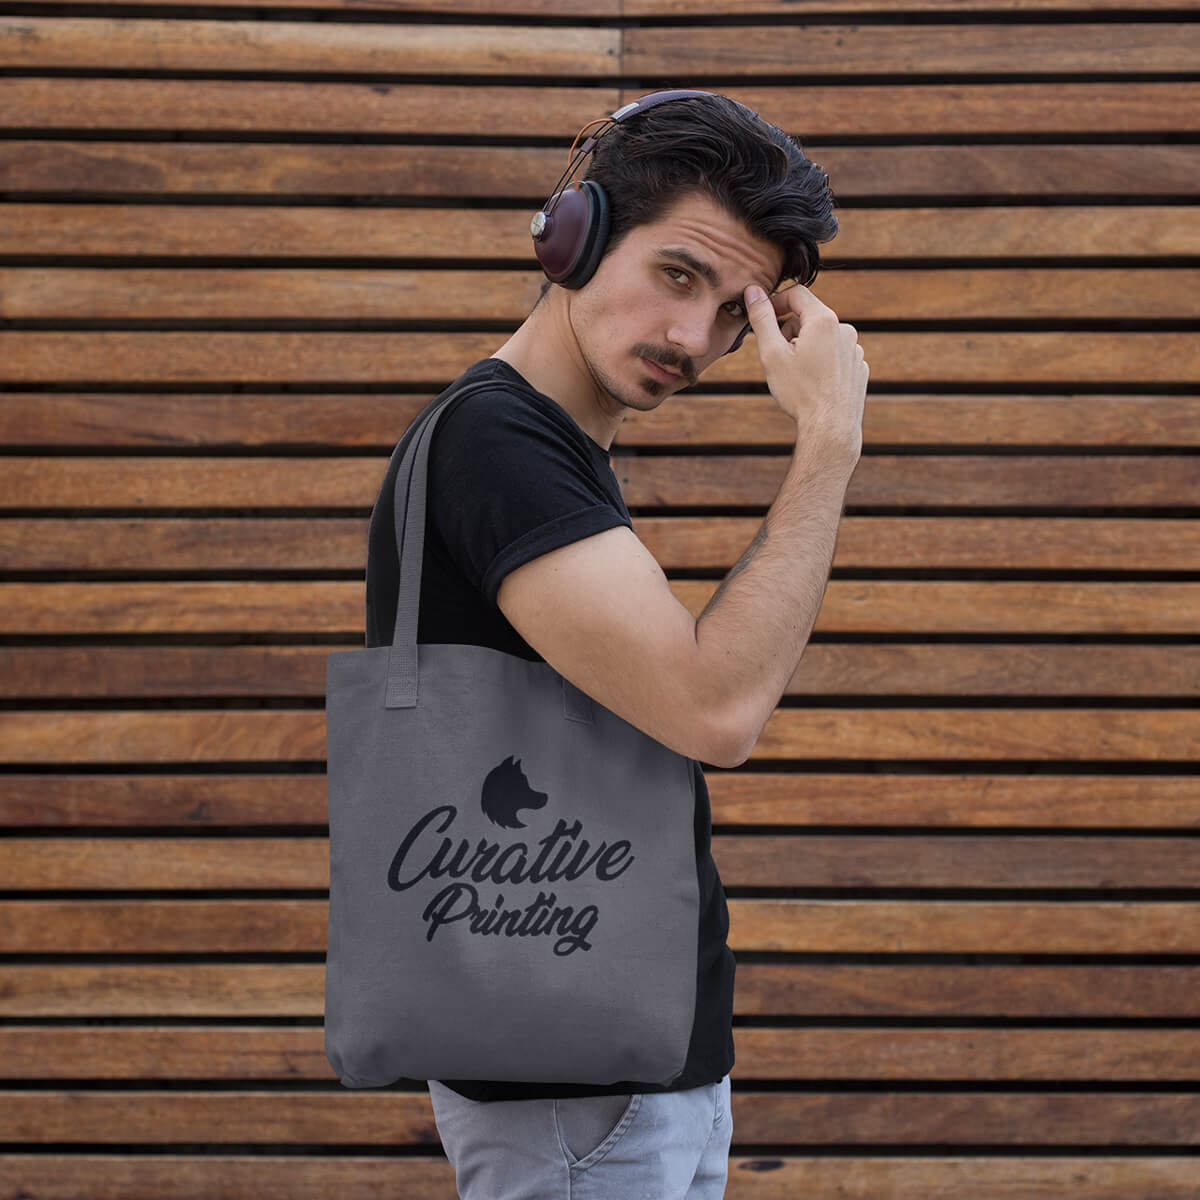 Guy carrying grey with black imprint custom promotional tote bags by curative printing